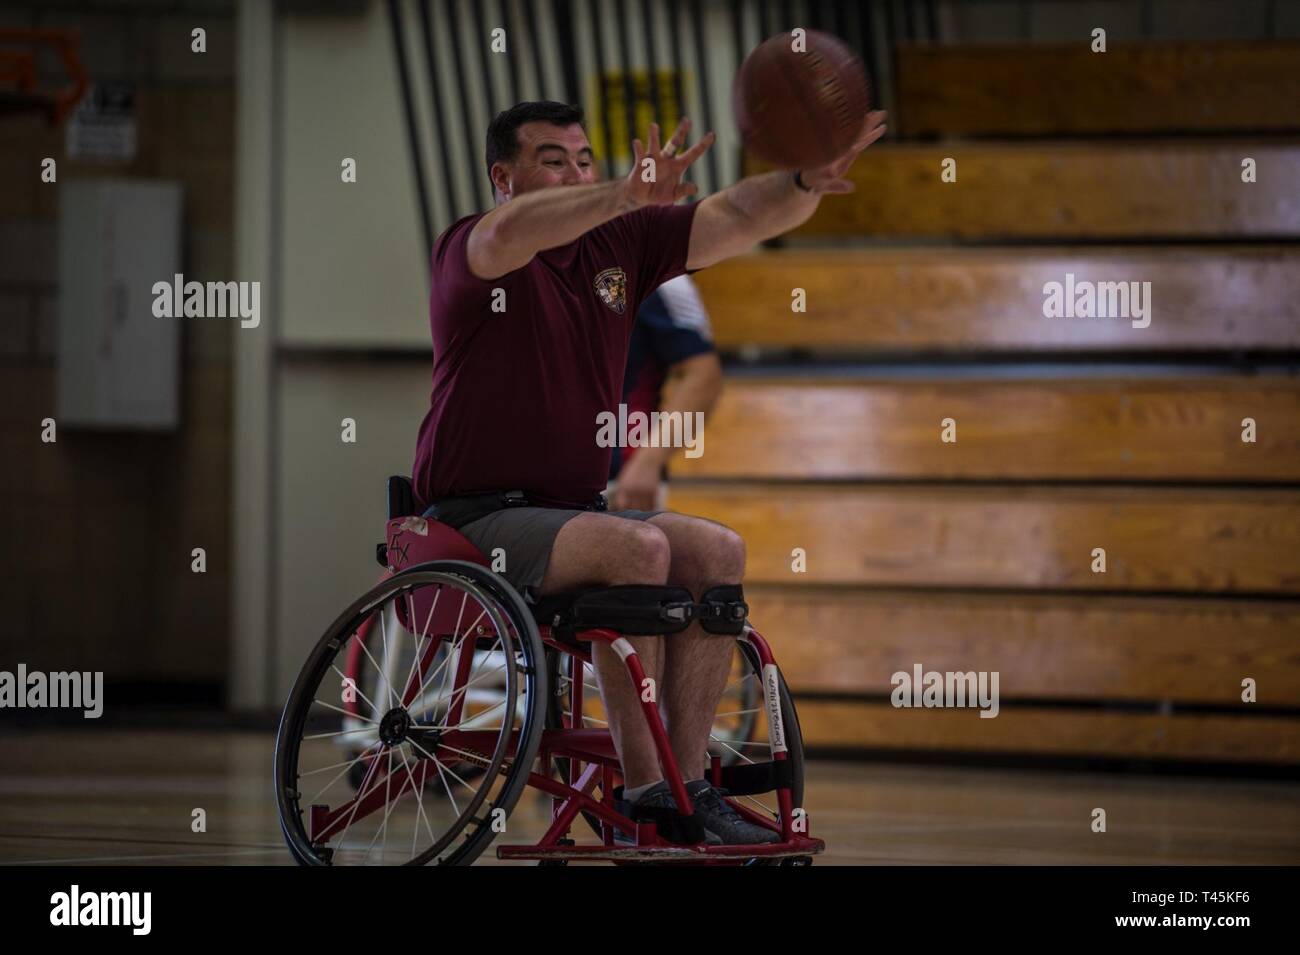 A U.S. Marine Corps athlete passes the ball during a 2019 Marine Corps Trials wheelchair basketball practice session at Marine Corps Base Camp Pendleton, California, March 1. The Marine Corps Trials promotes recovery and rehabilitation through adaptive sports participation and develops camaraderie among recovering service members and veterans. Additionally, the competition is an opportunity for participants to demonstrate physical and mental achievements and serves as the primary venue to select Marine Corps participants for the DoD Warrior Games. Stock Photo